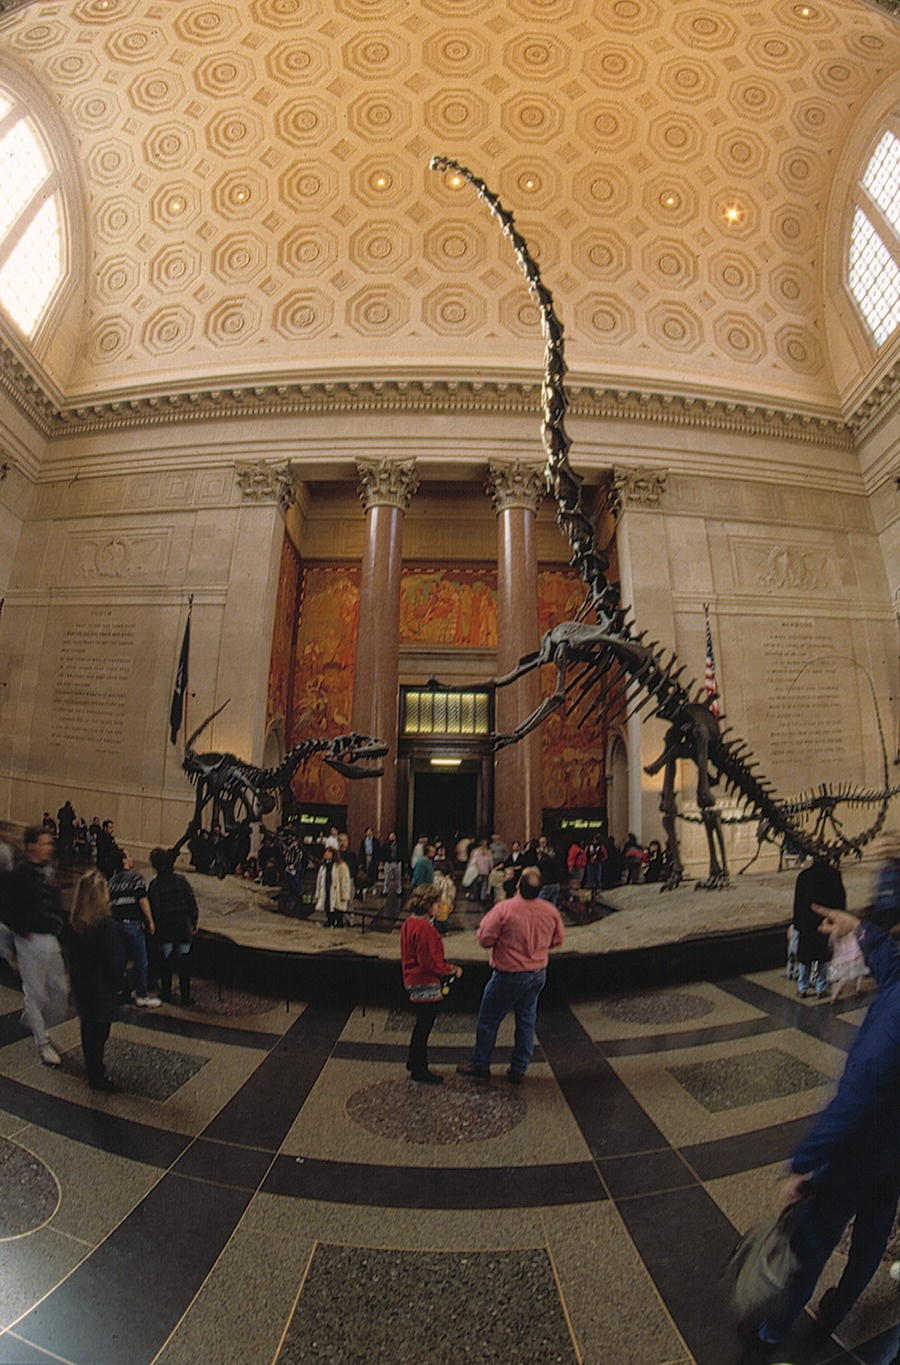 Photo displaying a fossil of a 40‐foot Barosaurus in American Museum of Natural History in New York City. People are observed around the fossil.